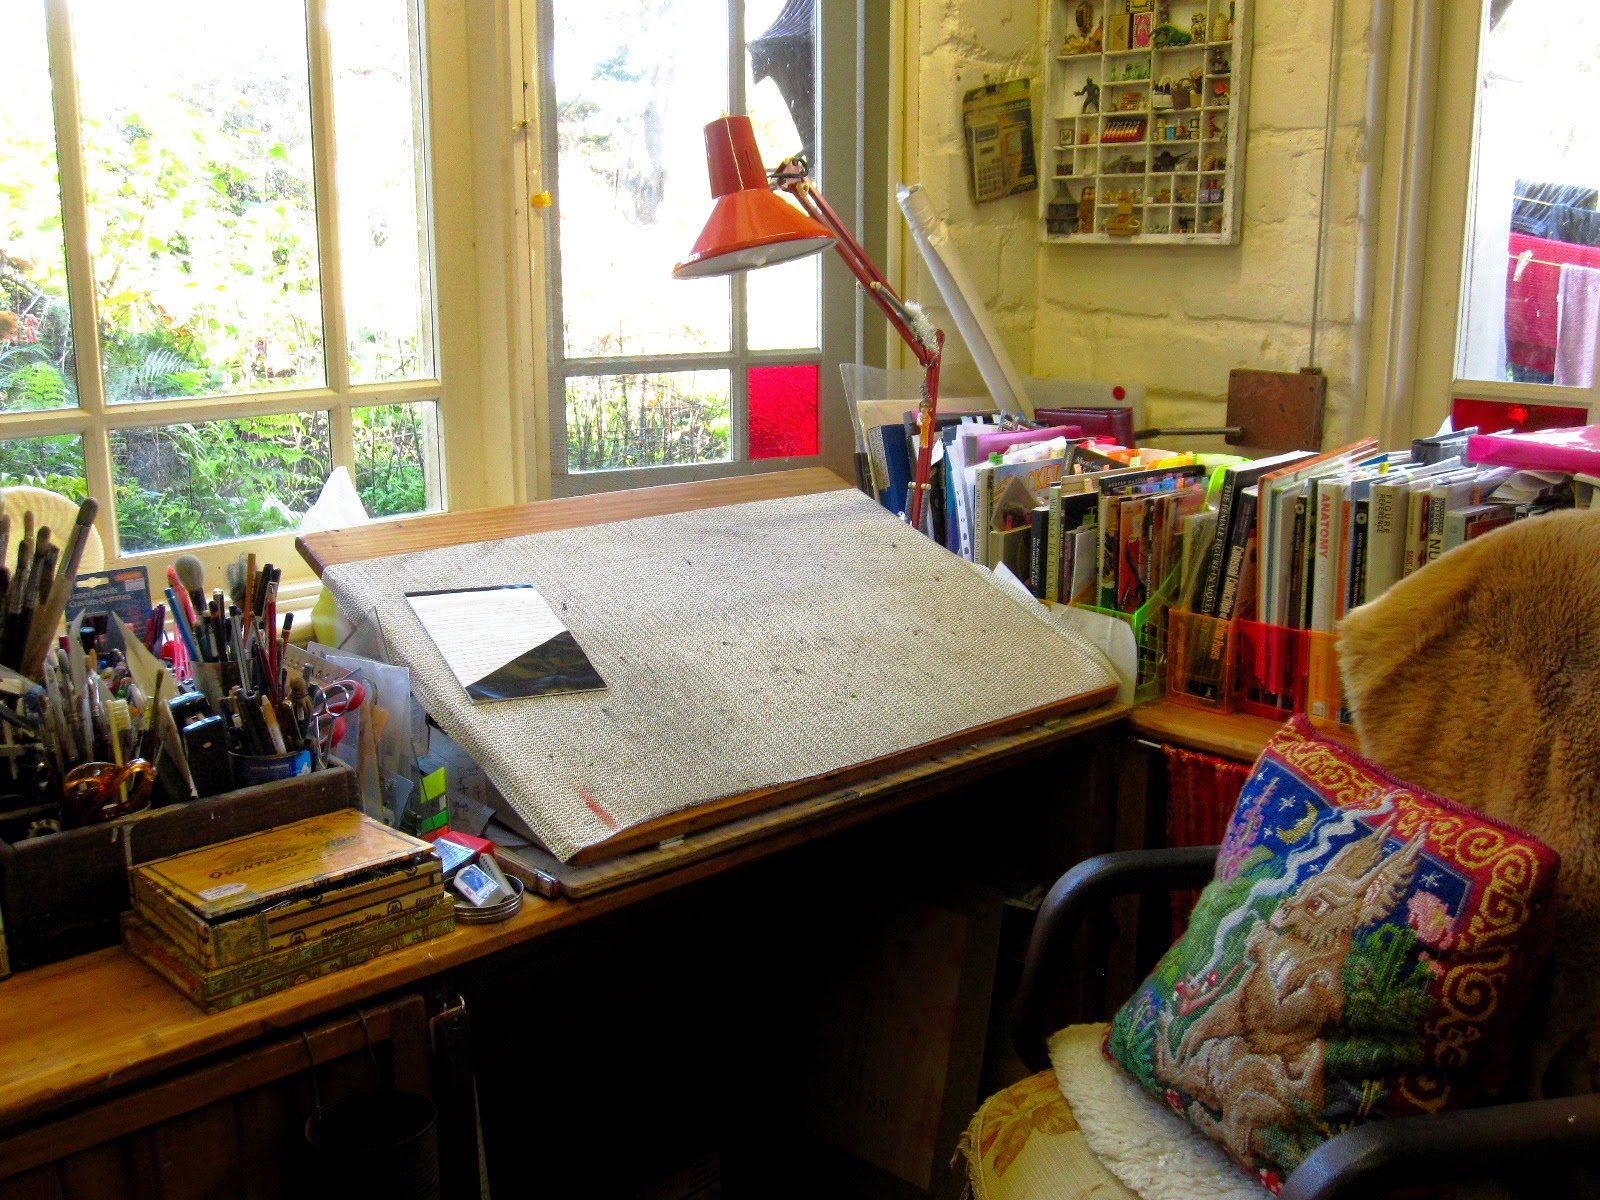 Drawing table with lamp, in the corner of a room overlooking the garden. On the desk chair is a tapestry cushion of a fantasy creature.